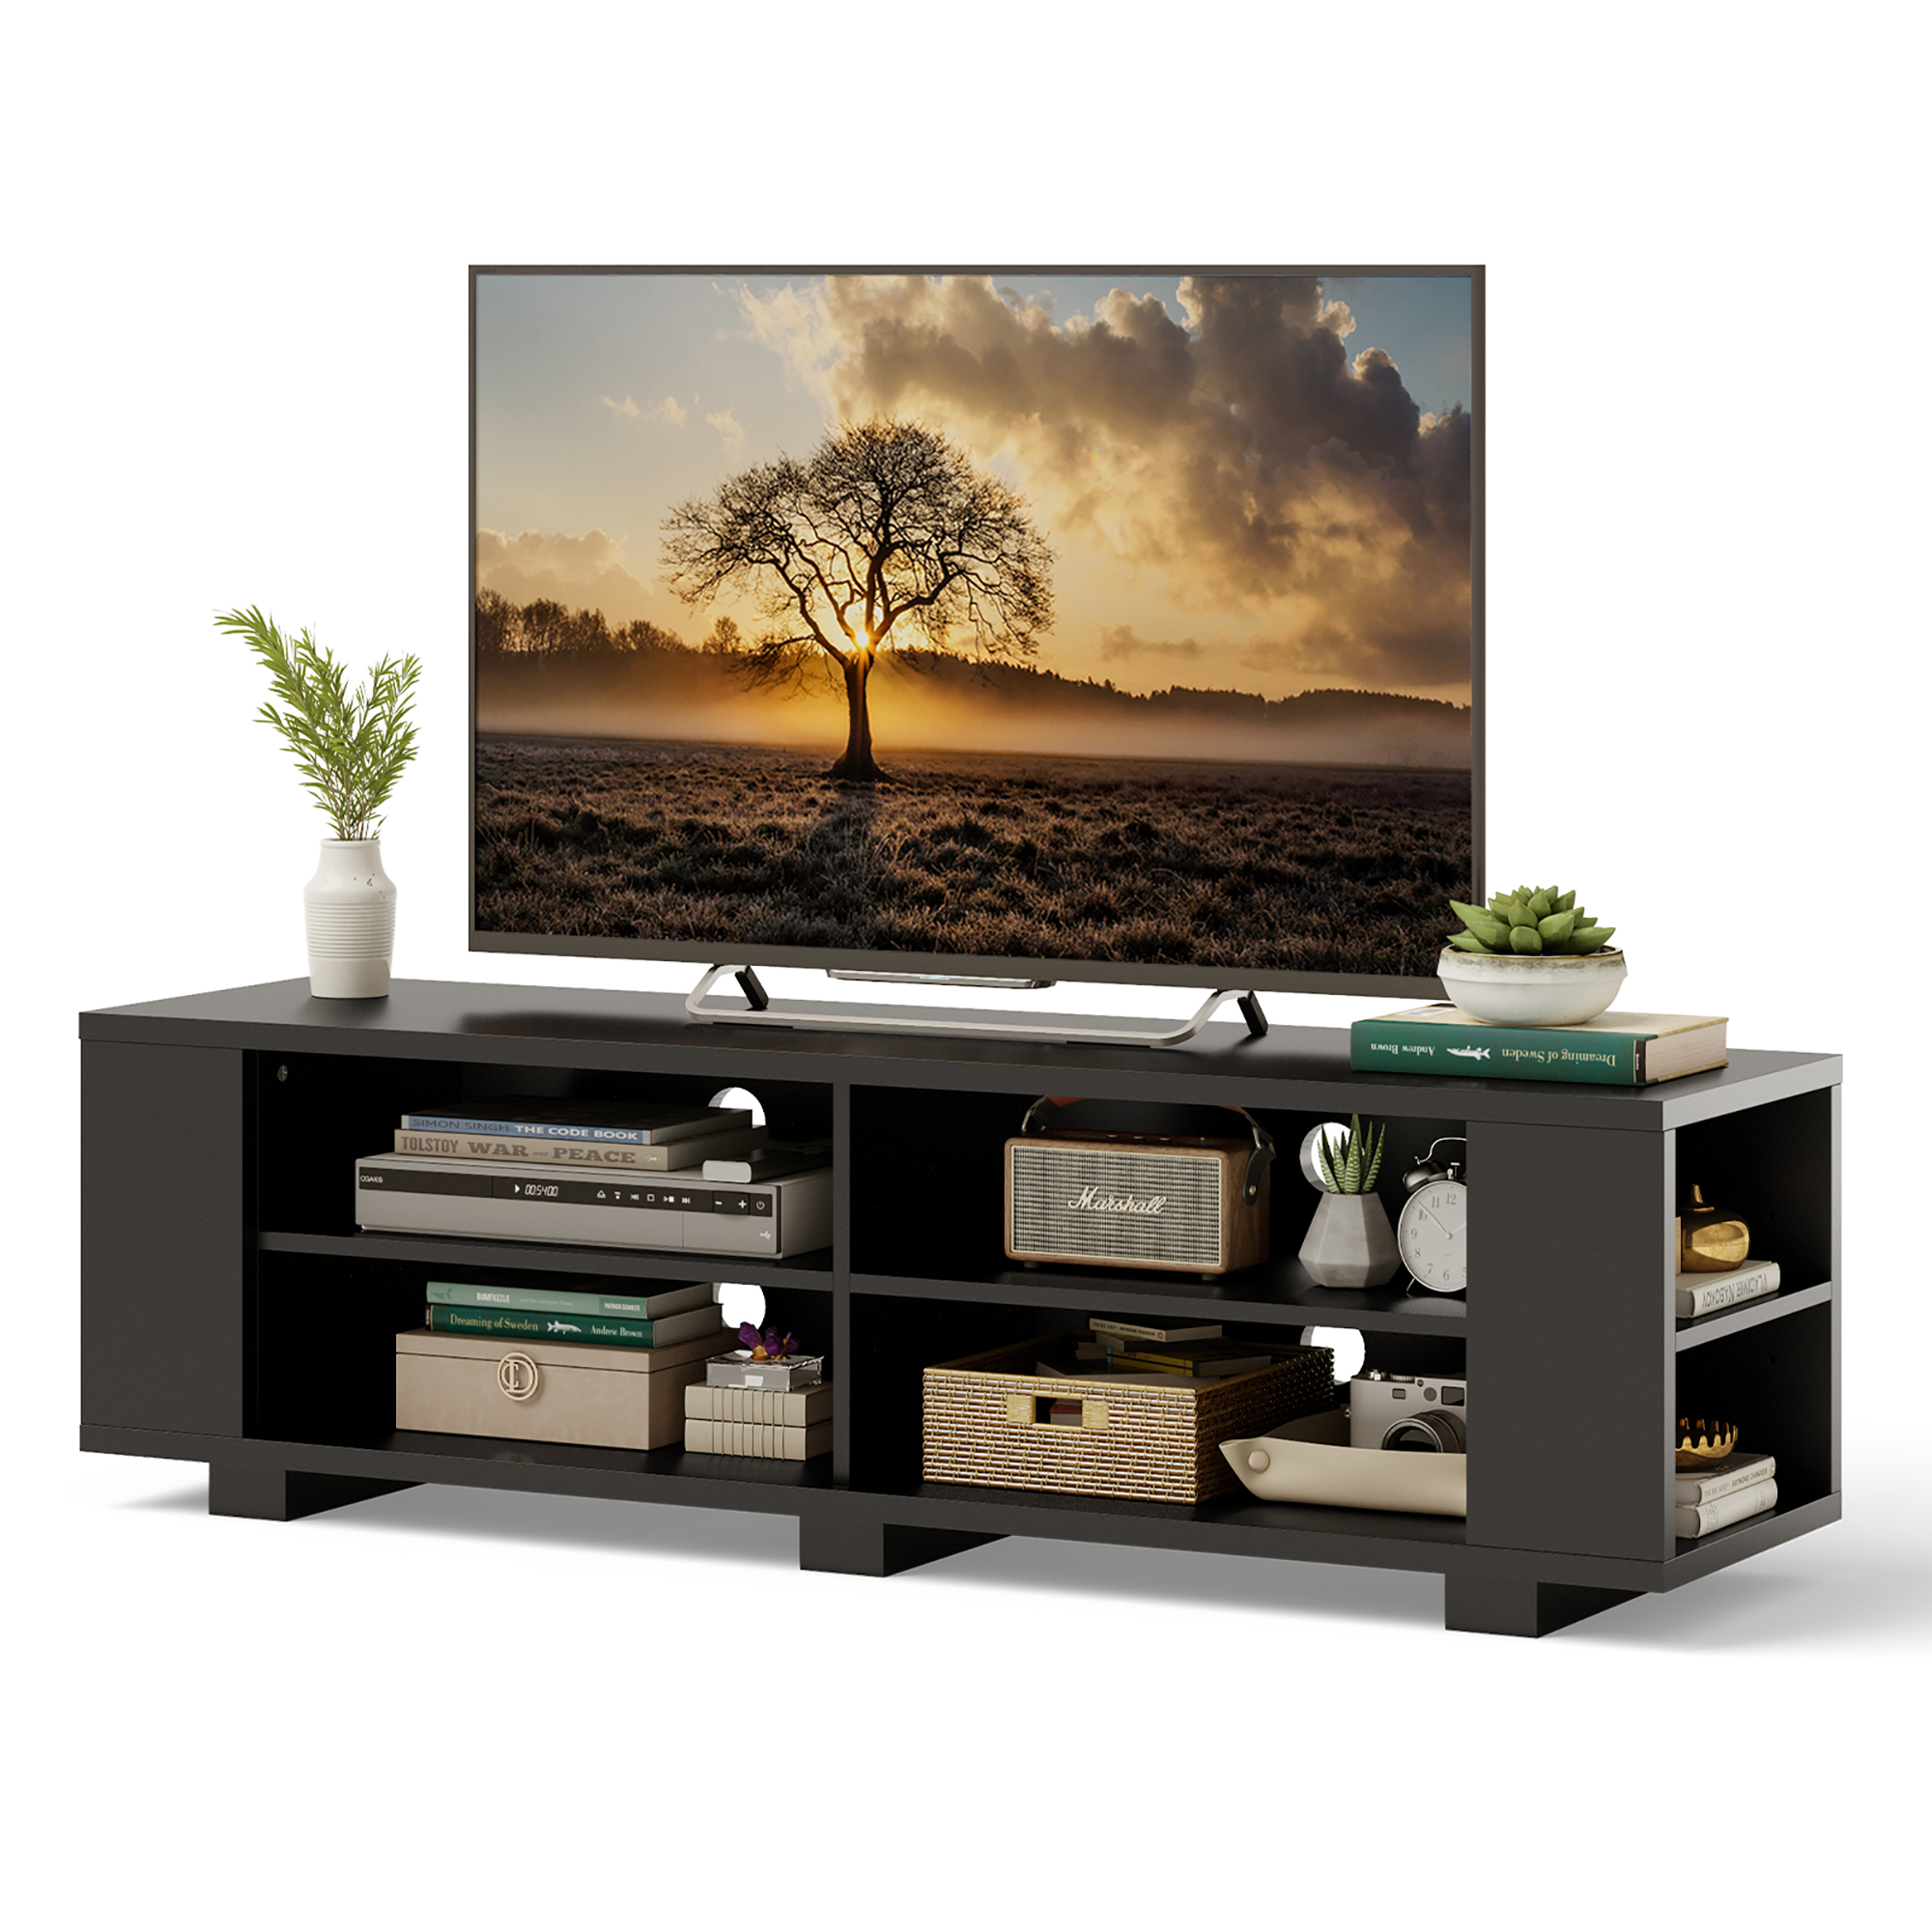 Costway 59'' Wood TV Stand Console Storage Entertainment Media Center w/ Adjustable Shelf Black - image 1 of 9